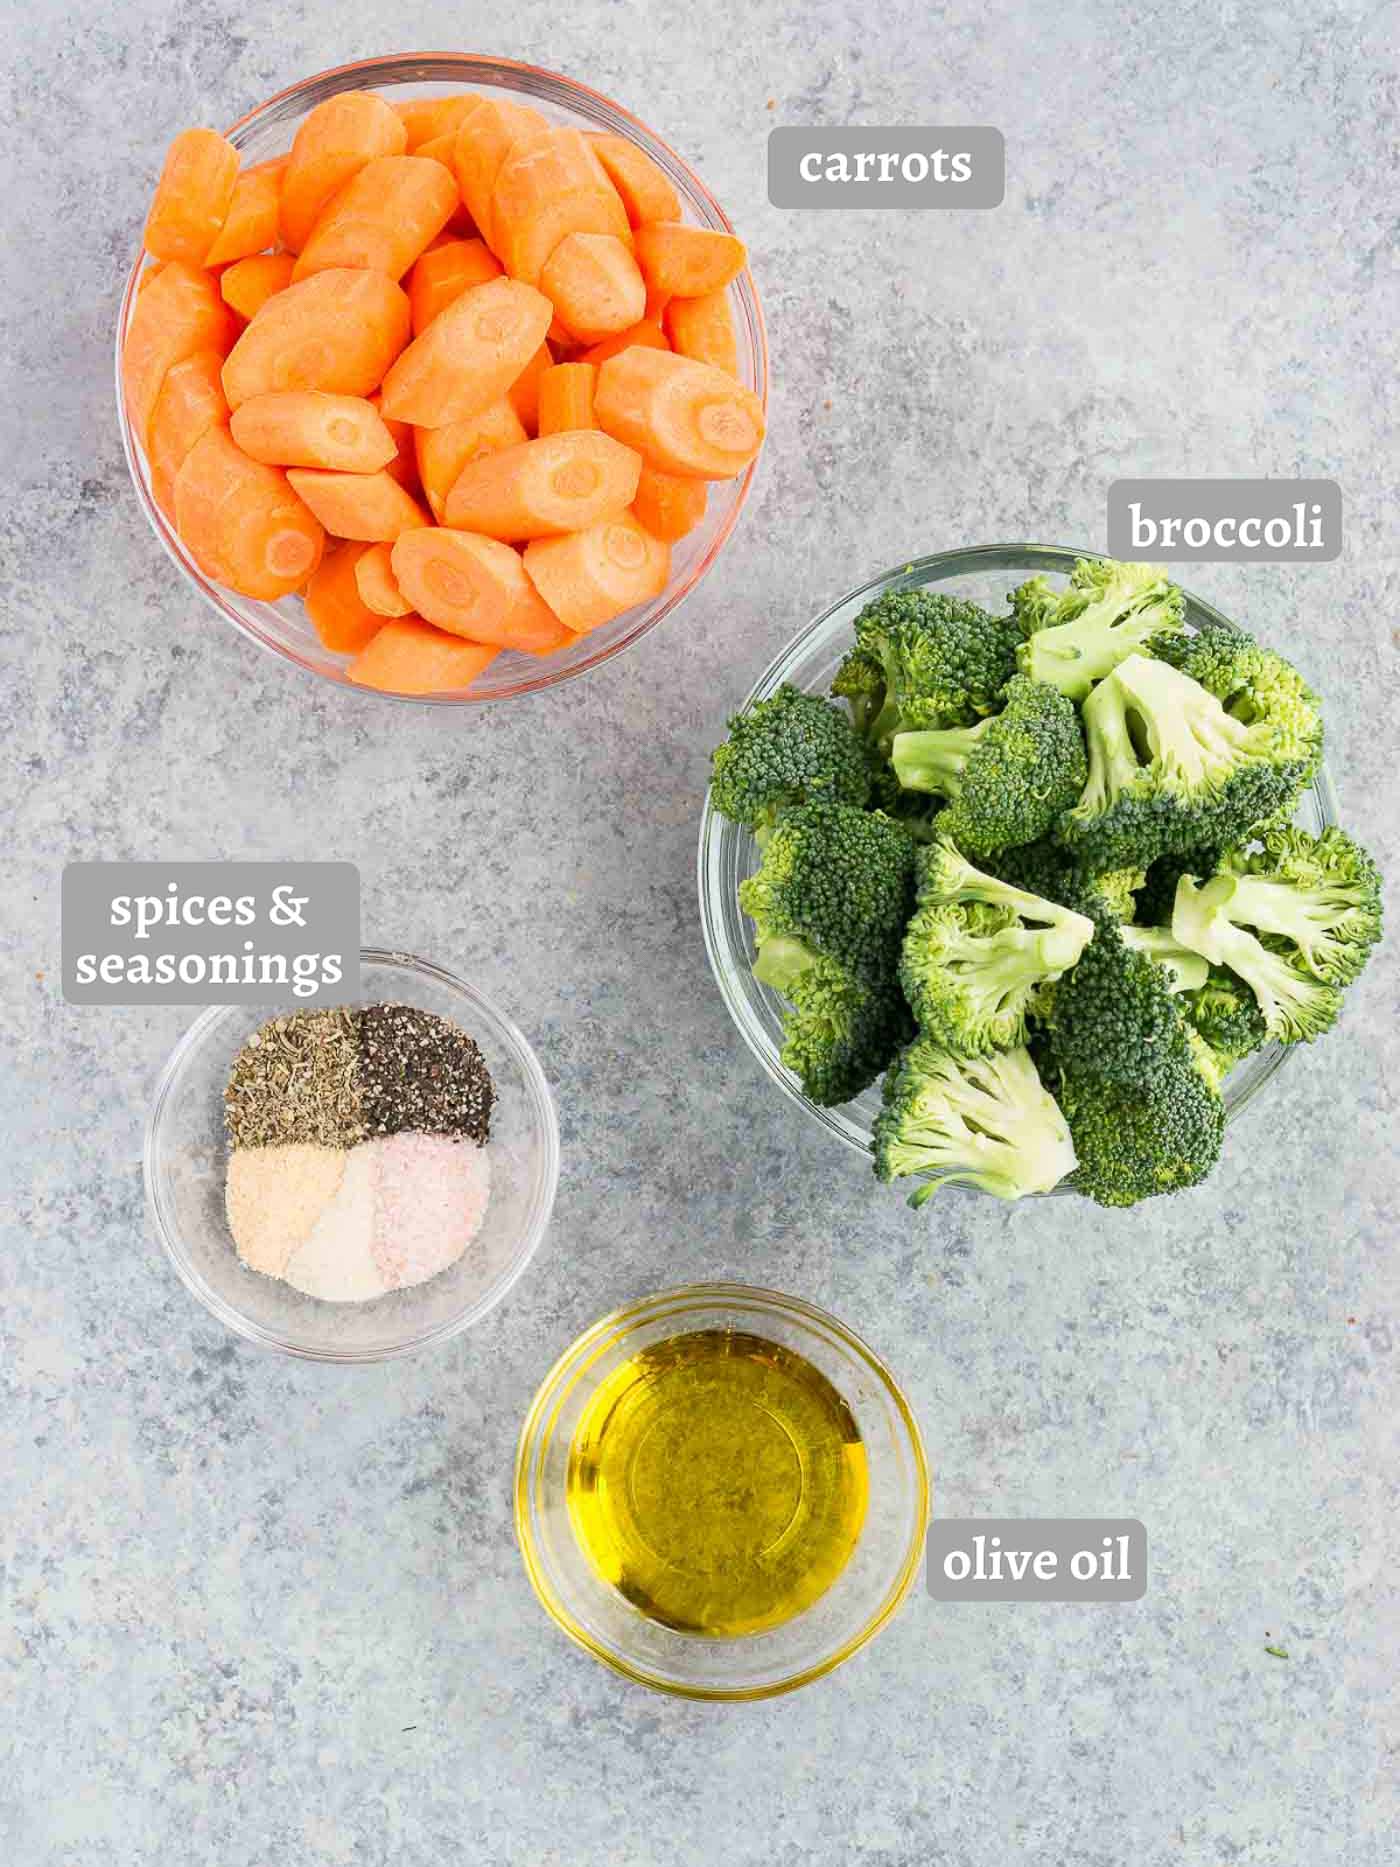 ingredients for roasted broccoli and carrots